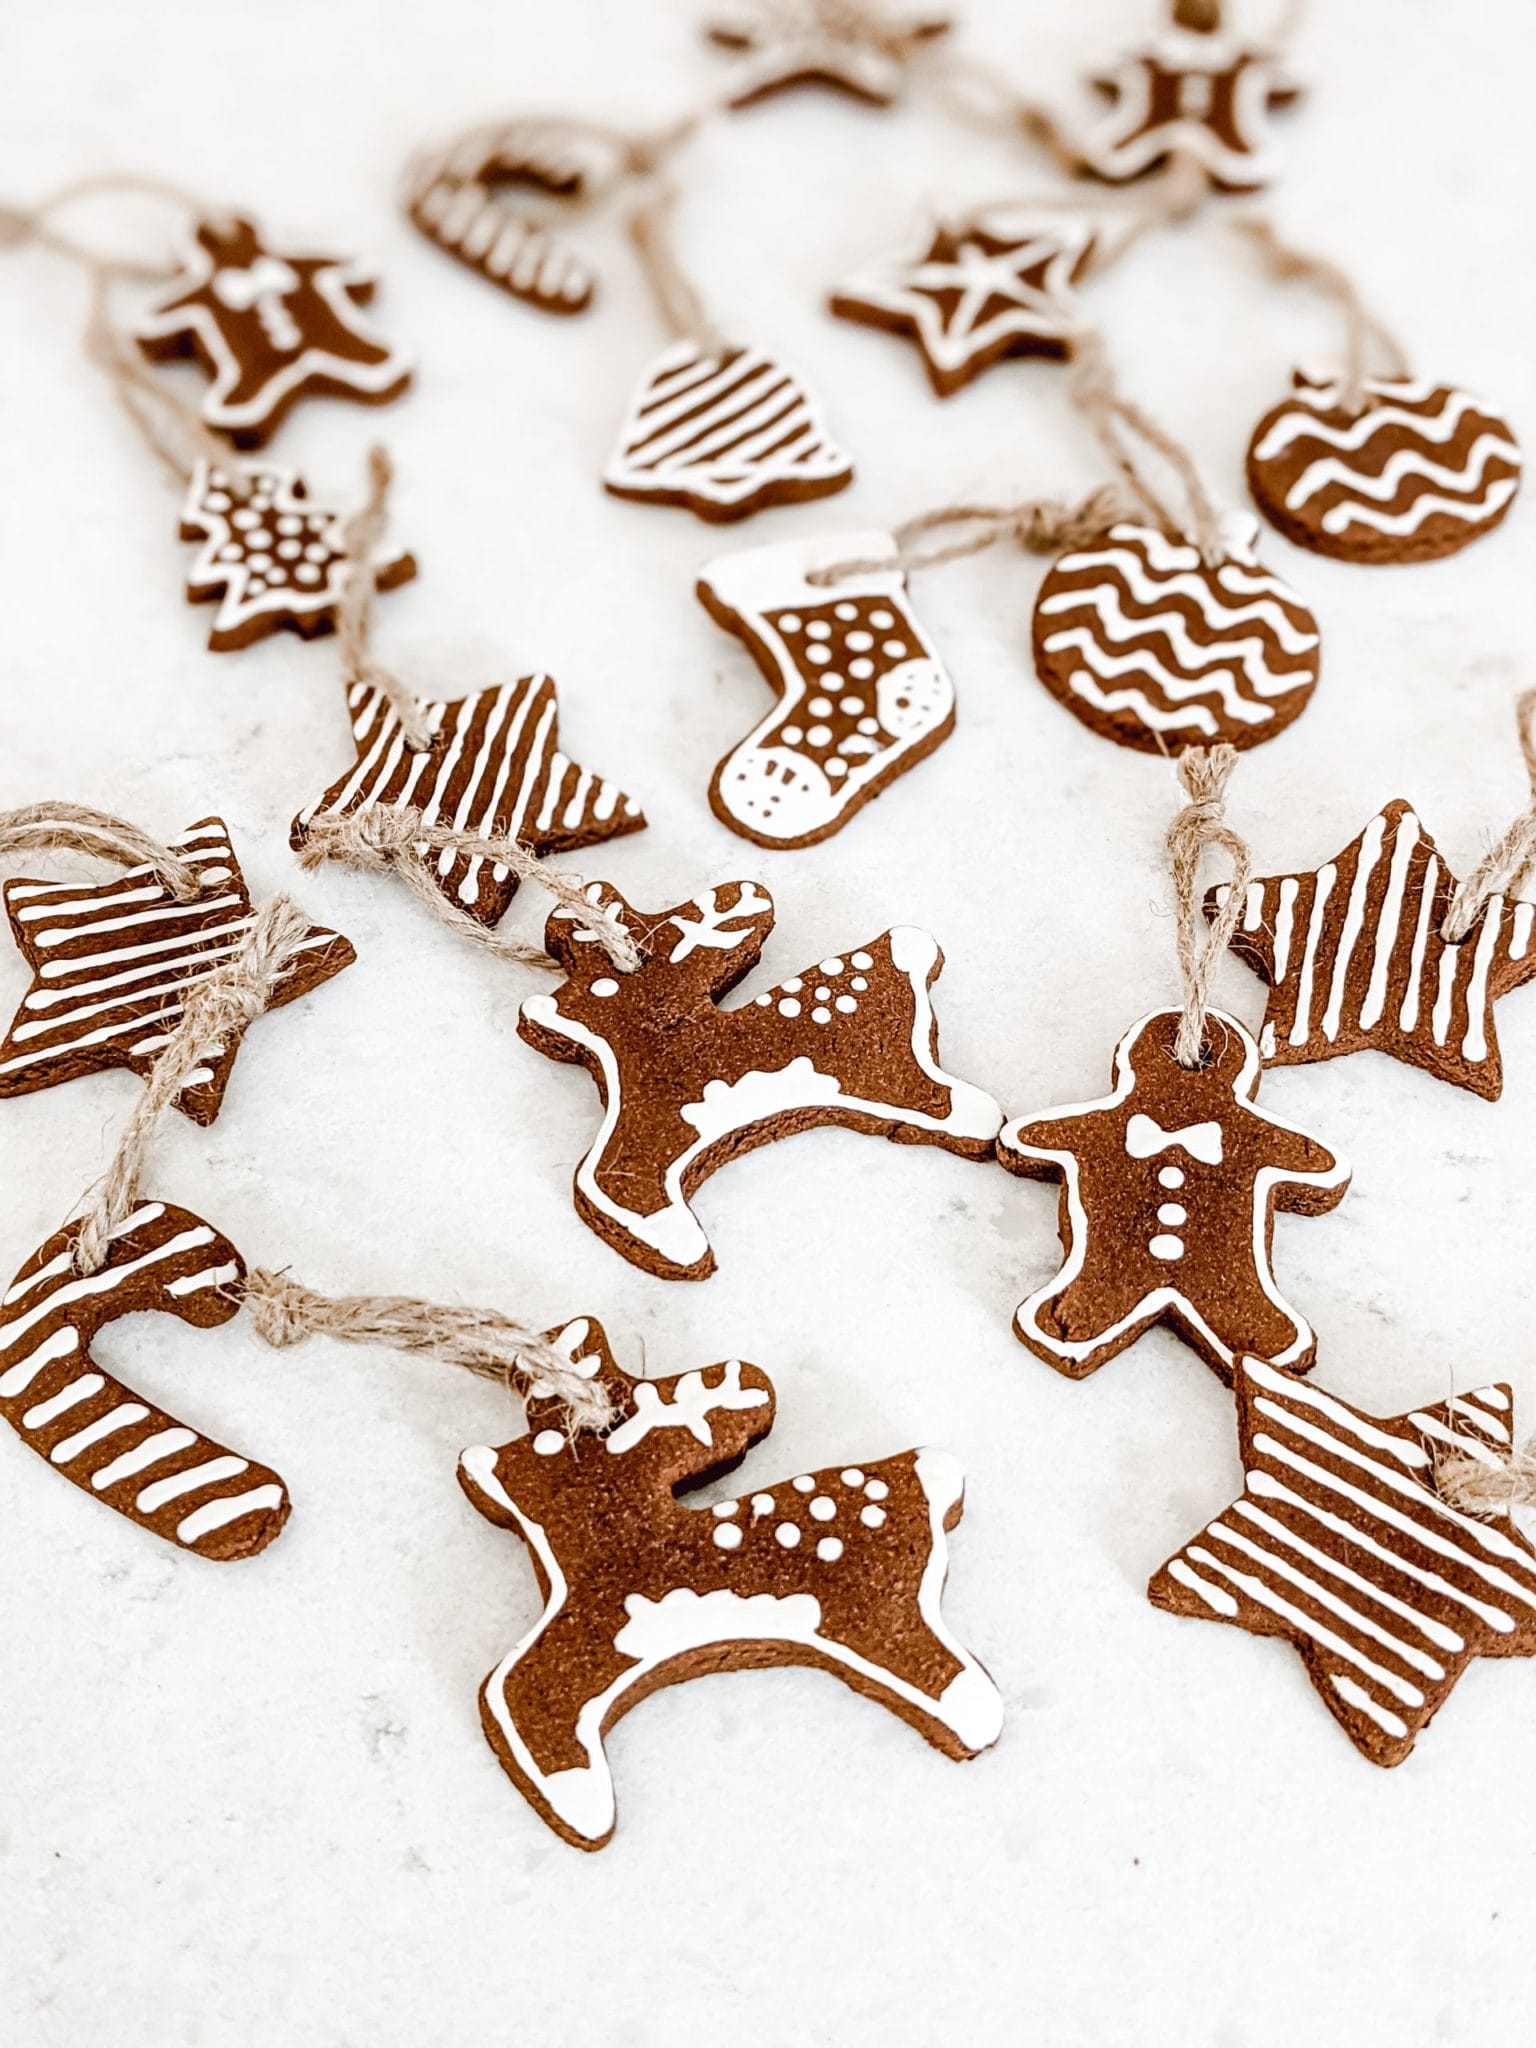 DIY Iced Gingerbread Cookie Ornaments Made with Cinnamon Dough